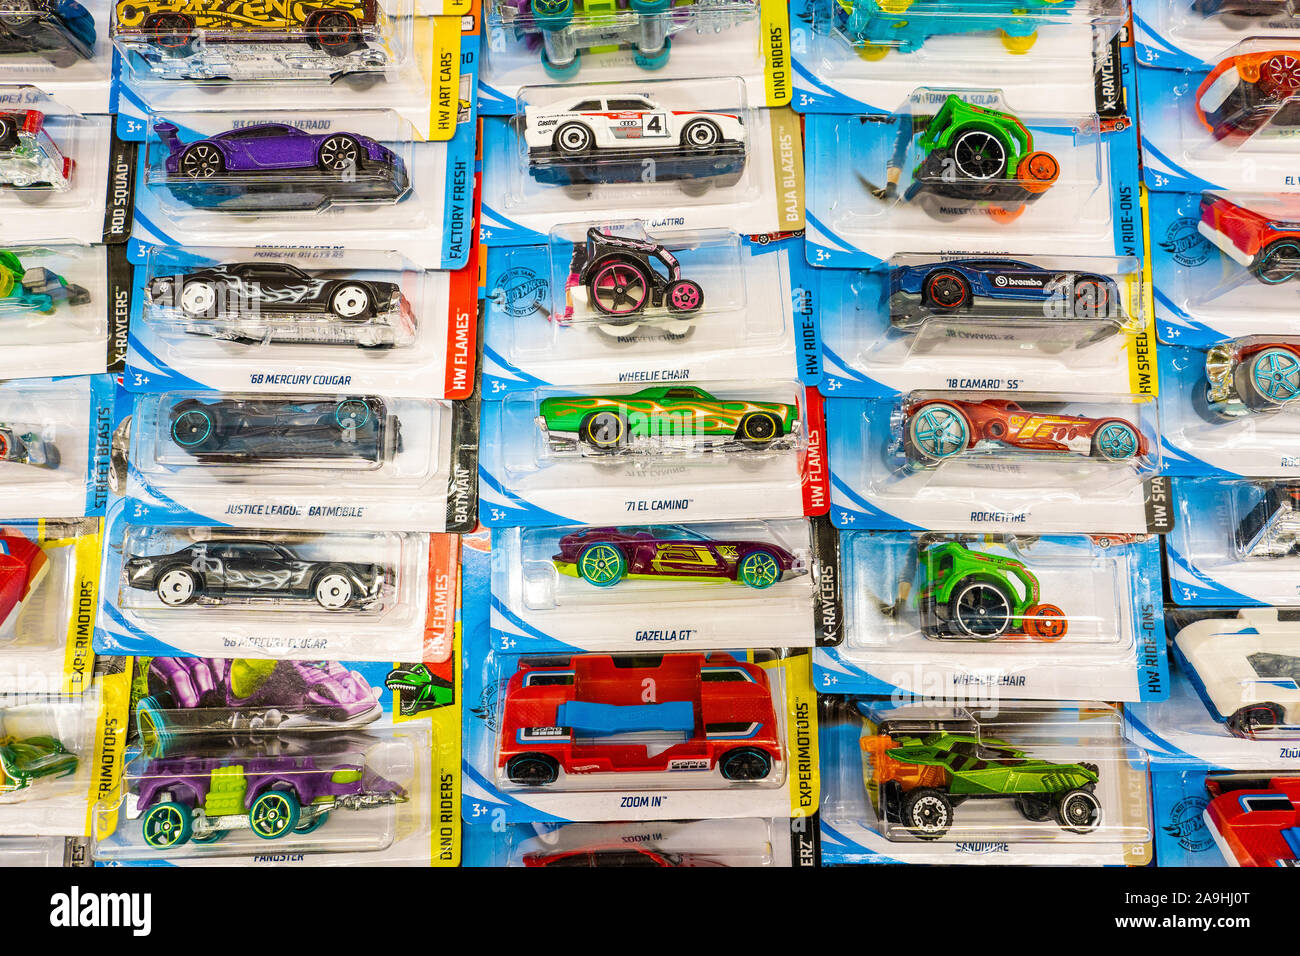 Hotwheels High Resolution Stock Photography And Images Alamy